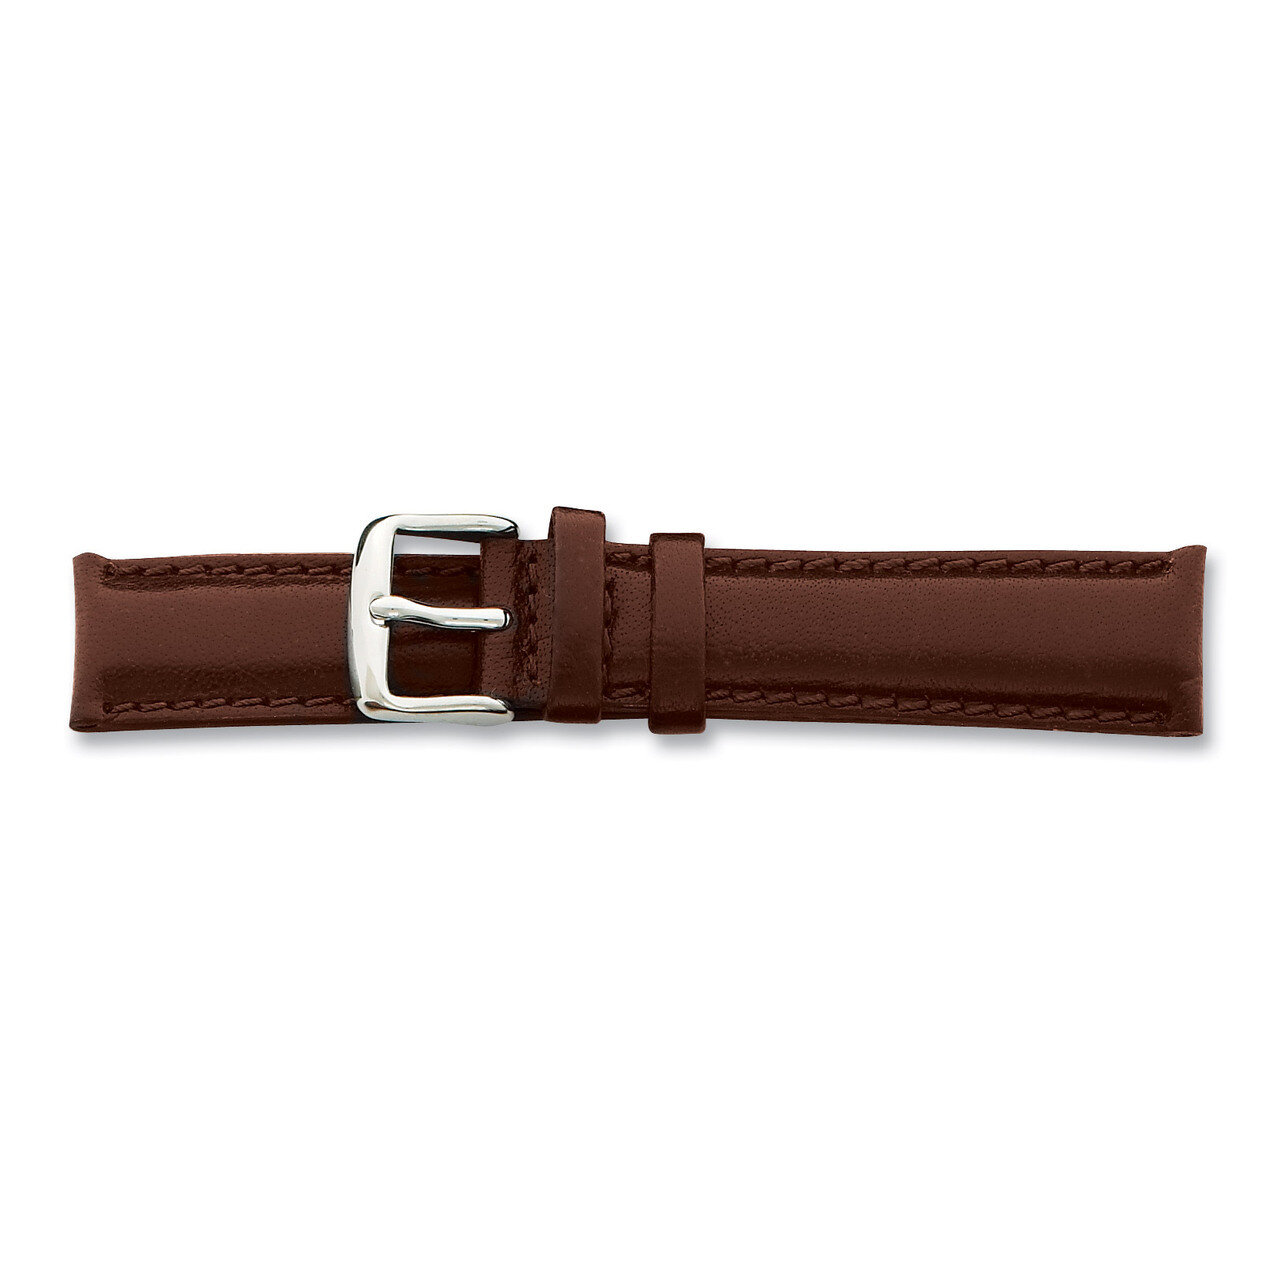 18mm Brown Smooth Leather Chrono Watch Band 7.5 Inch Silver-tone Buckle BA140-18